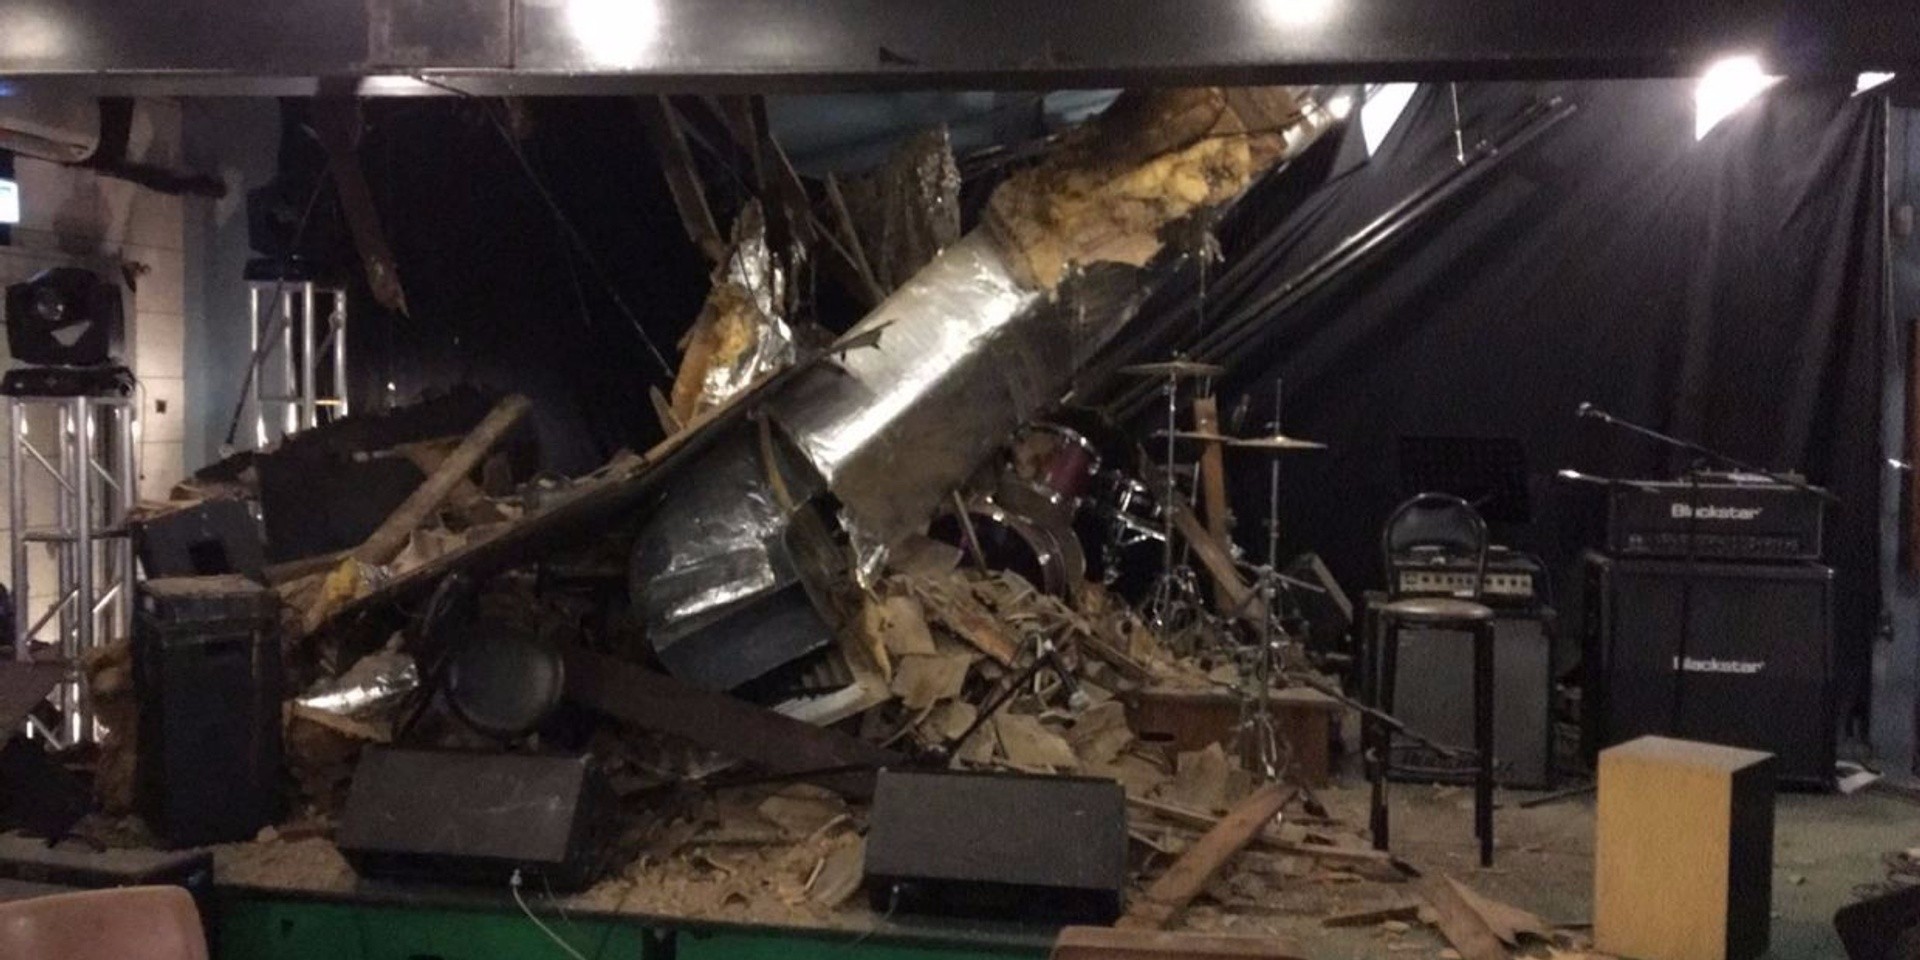 Ceiling collapses in Hong Kong music venue Warehouse, gear damaged